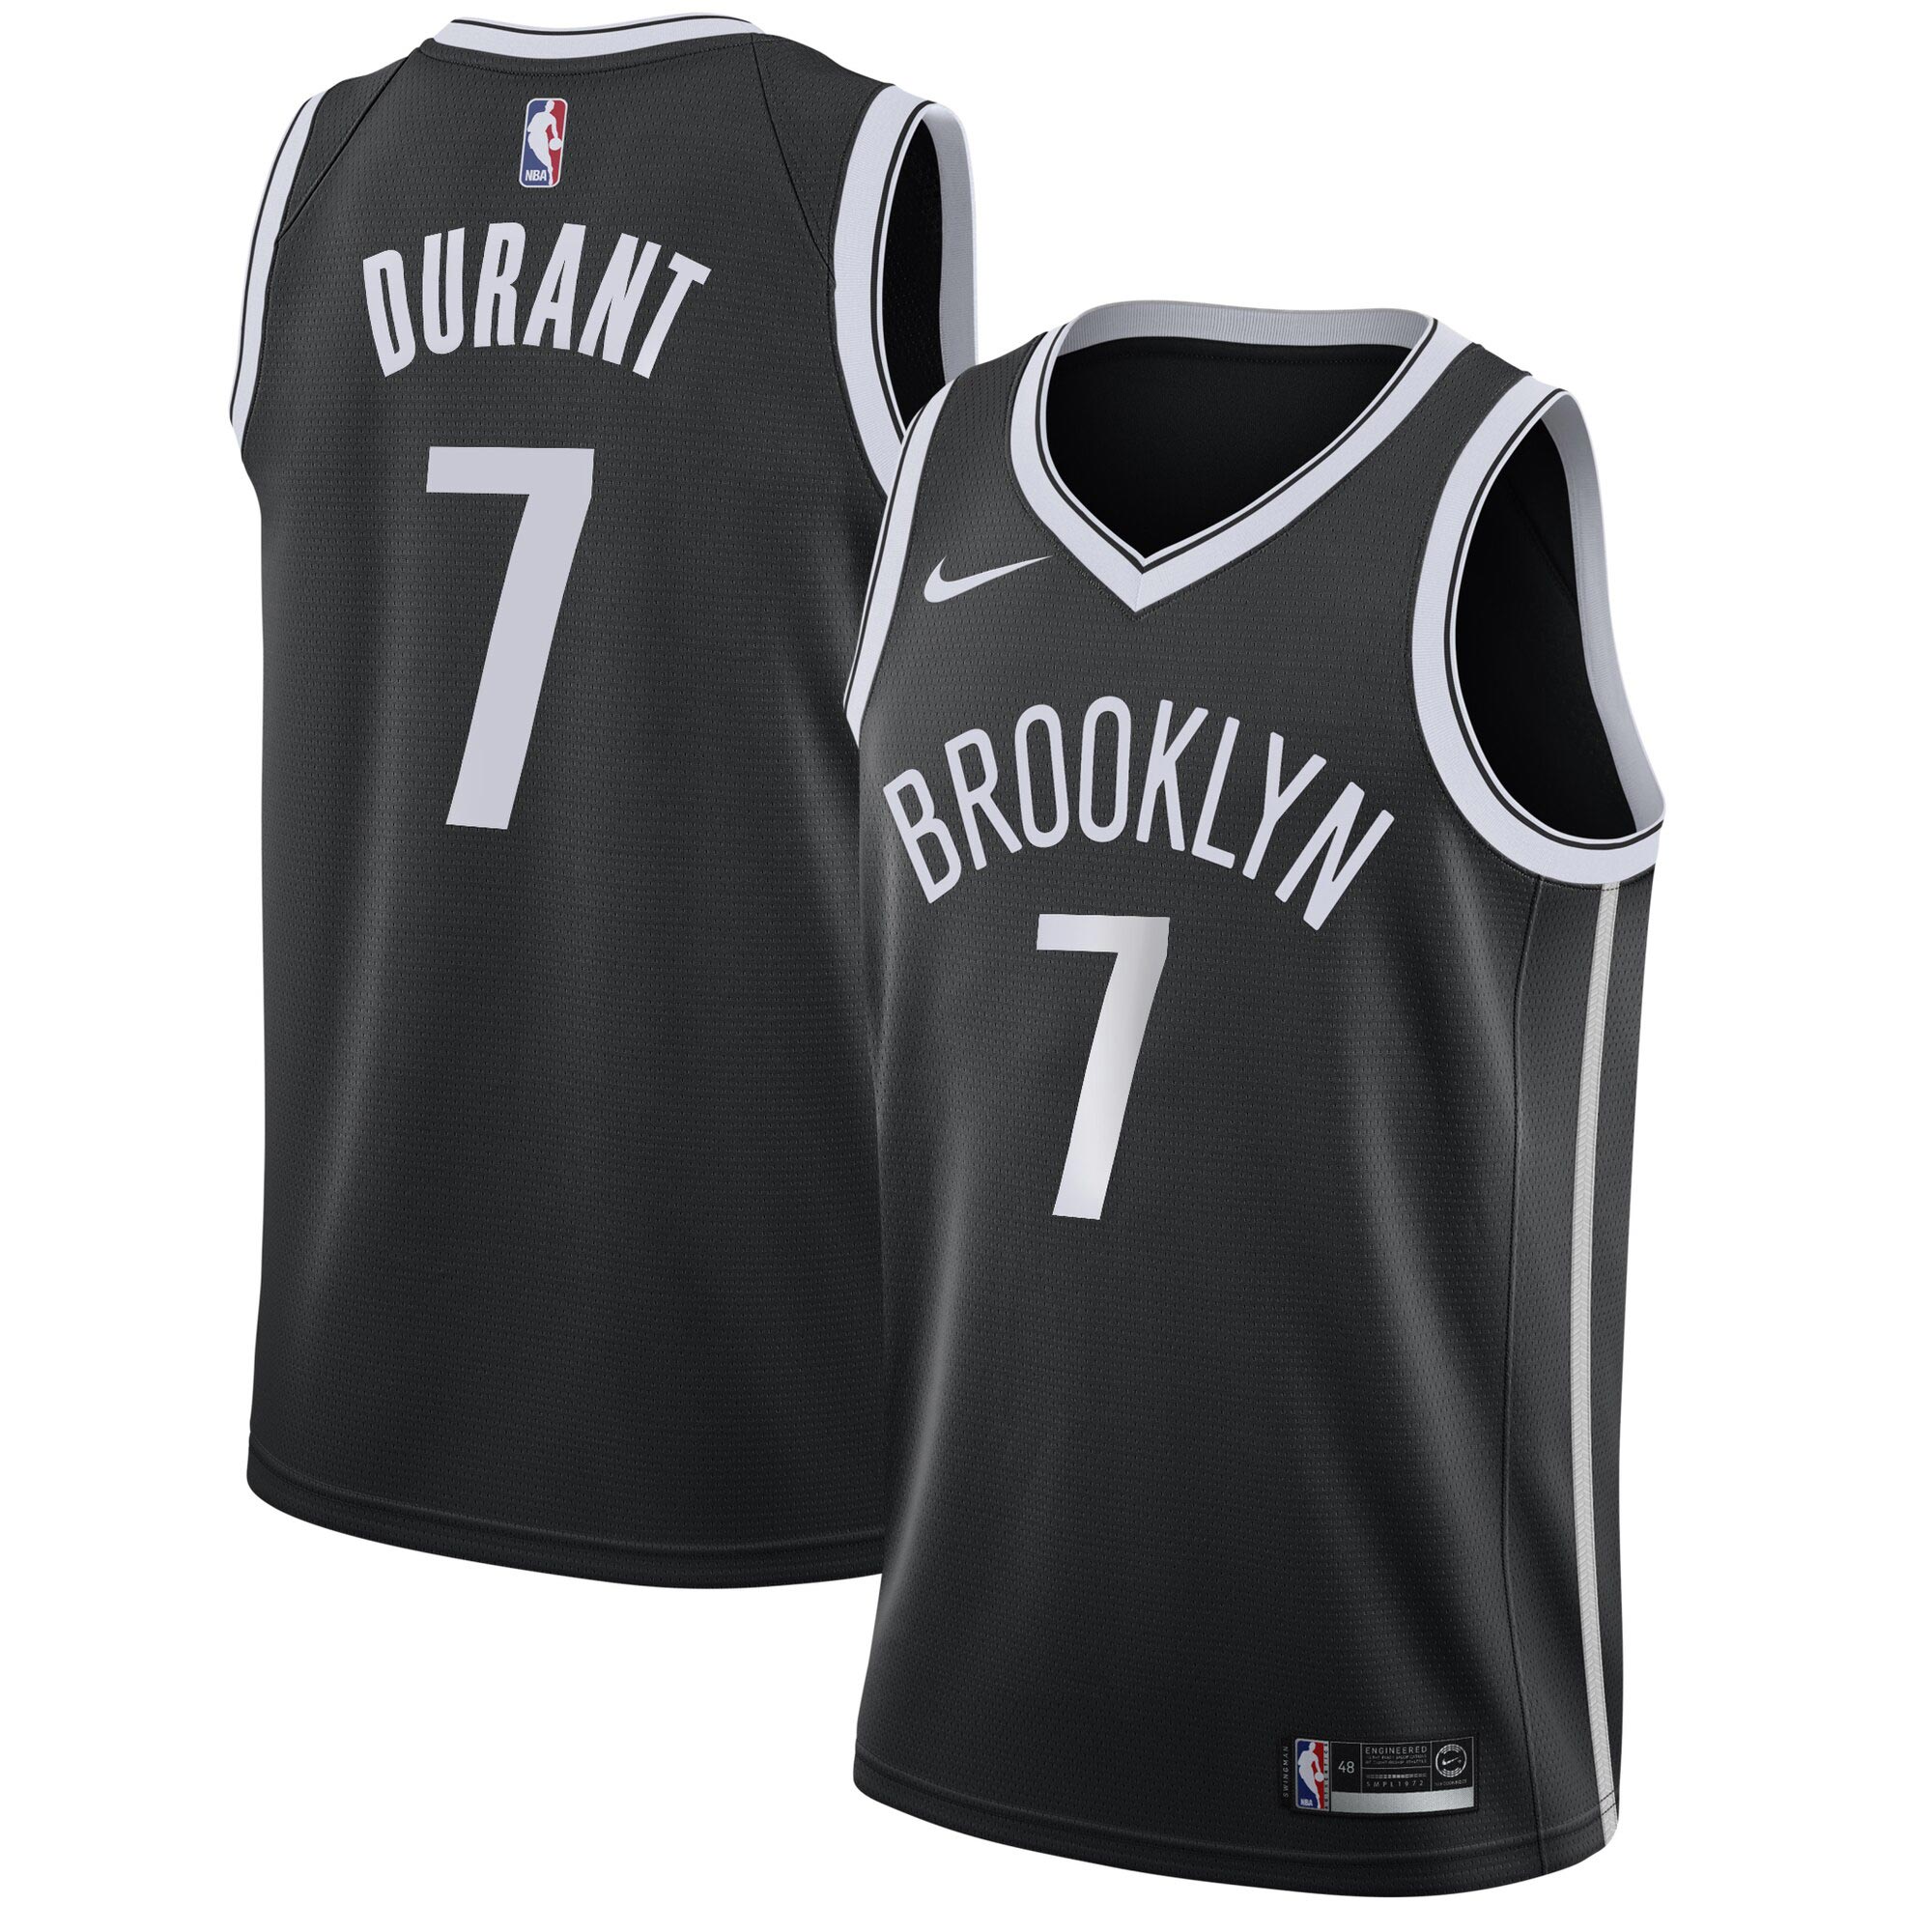 kevin durant's jersey number